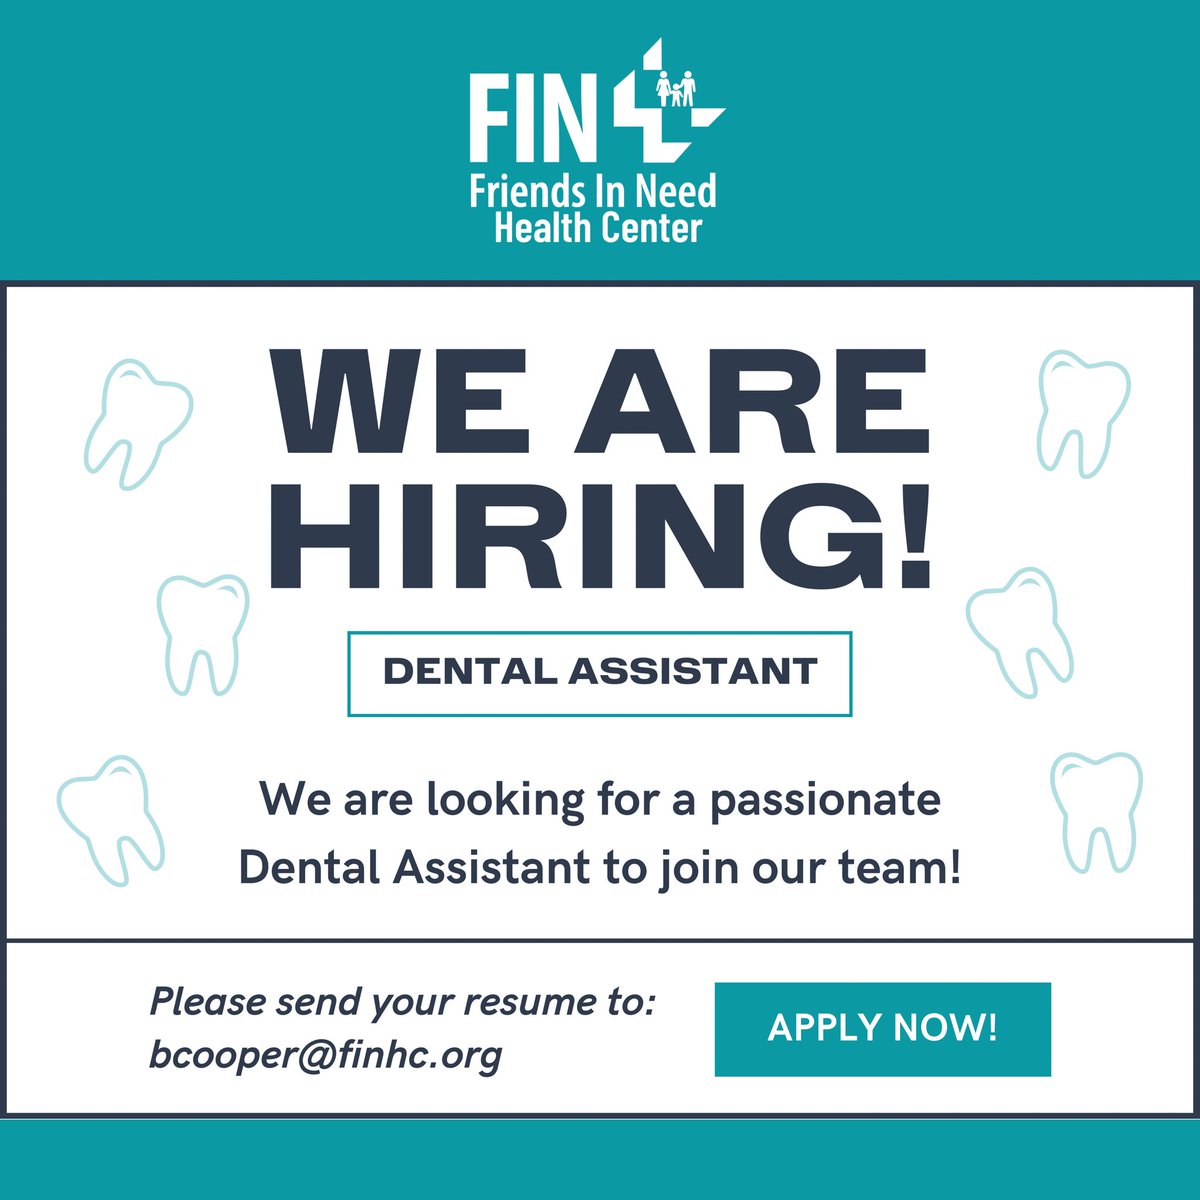 Friends In Need Health Center is seeking a compassionate Dental Assistant to join our dedicated team. Two or three days a week, flexible schedules available! Please email bcooper@finhc.org
#hiring #werehiring #dentalassistant #dental #kingsporttn #kingsporttennessee ##tricitiestn